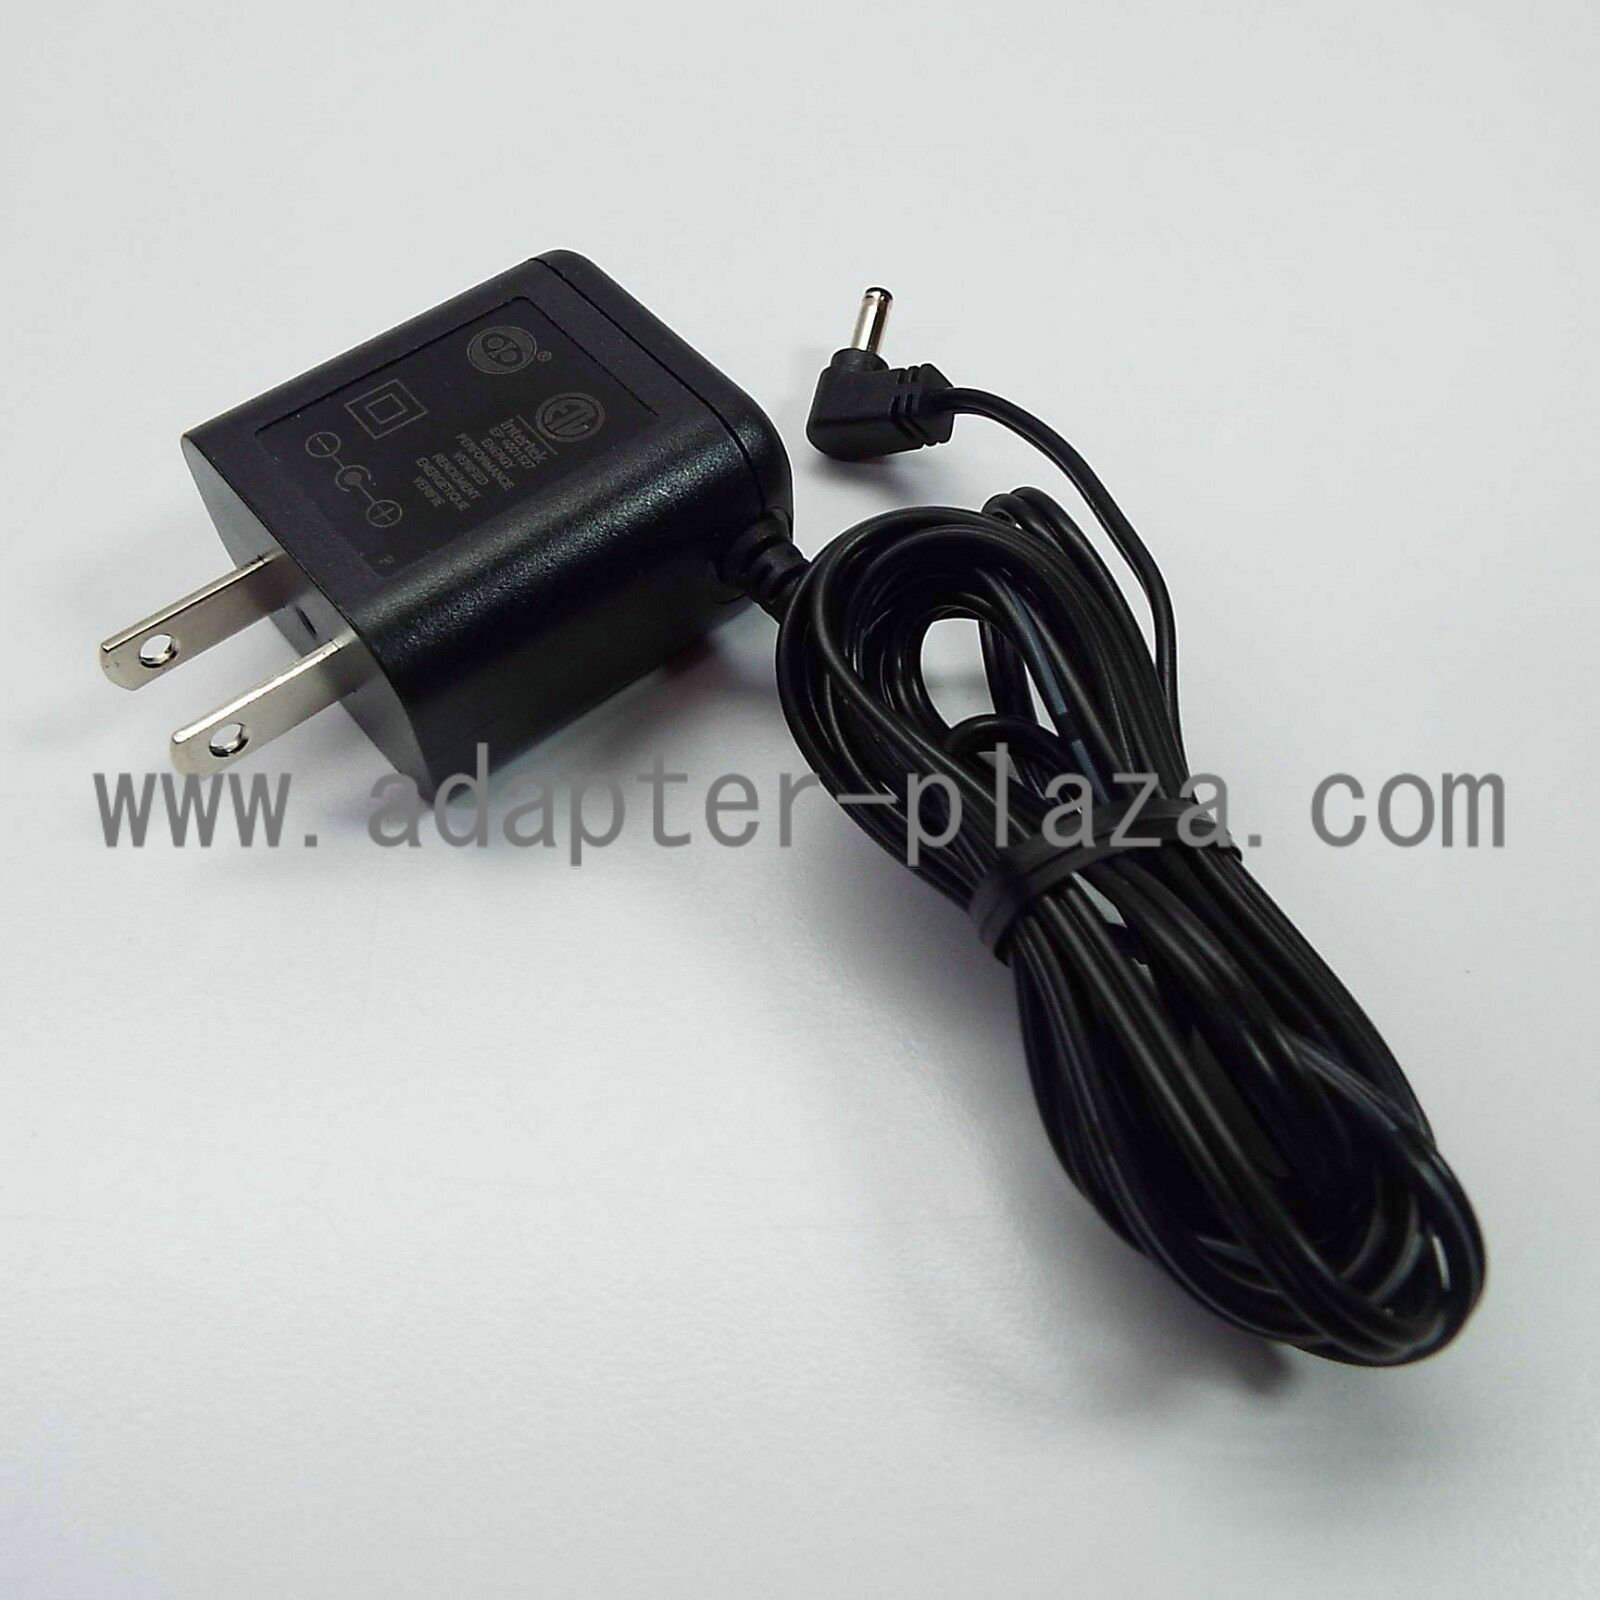 *Brand NEW* S003GU0600010 for AT&T CL82314 Cordless Phone System (H3500) AC DC Adapter POWER SUPPLY